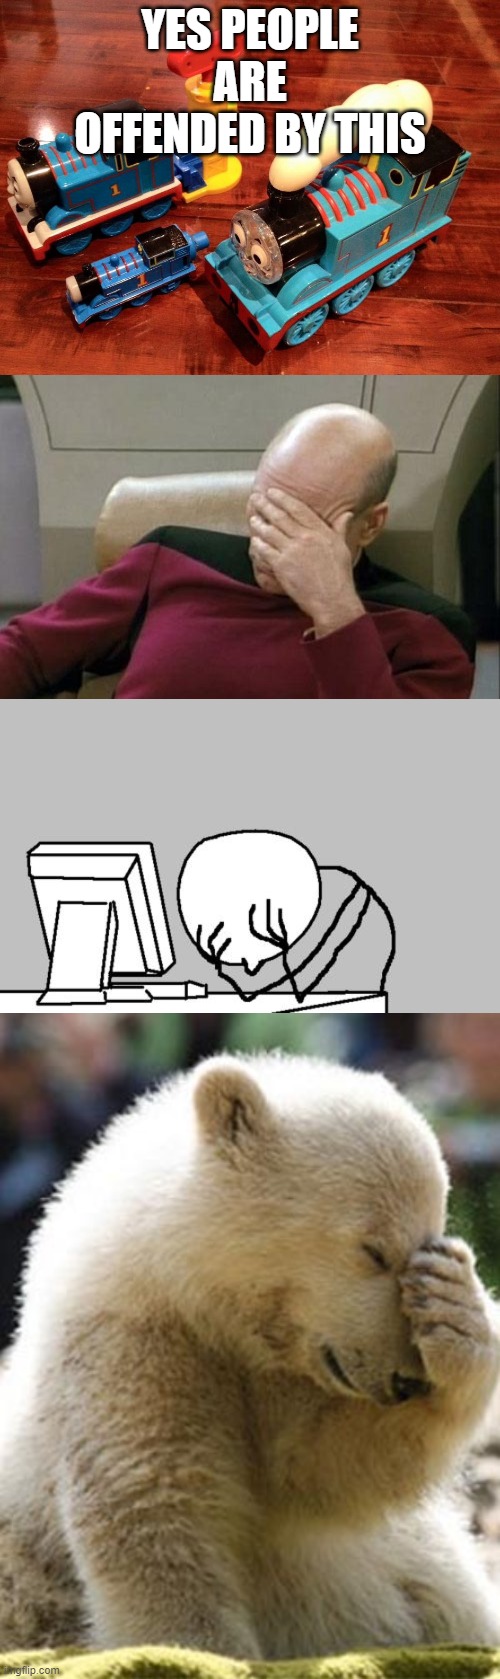 why? | YES PEOPLE ARE OFFENDED BY THIS | image tagged in memes,computer guy facepalm,captain picard facepalm,facepalm bear | made w/ Imgflip meme maker